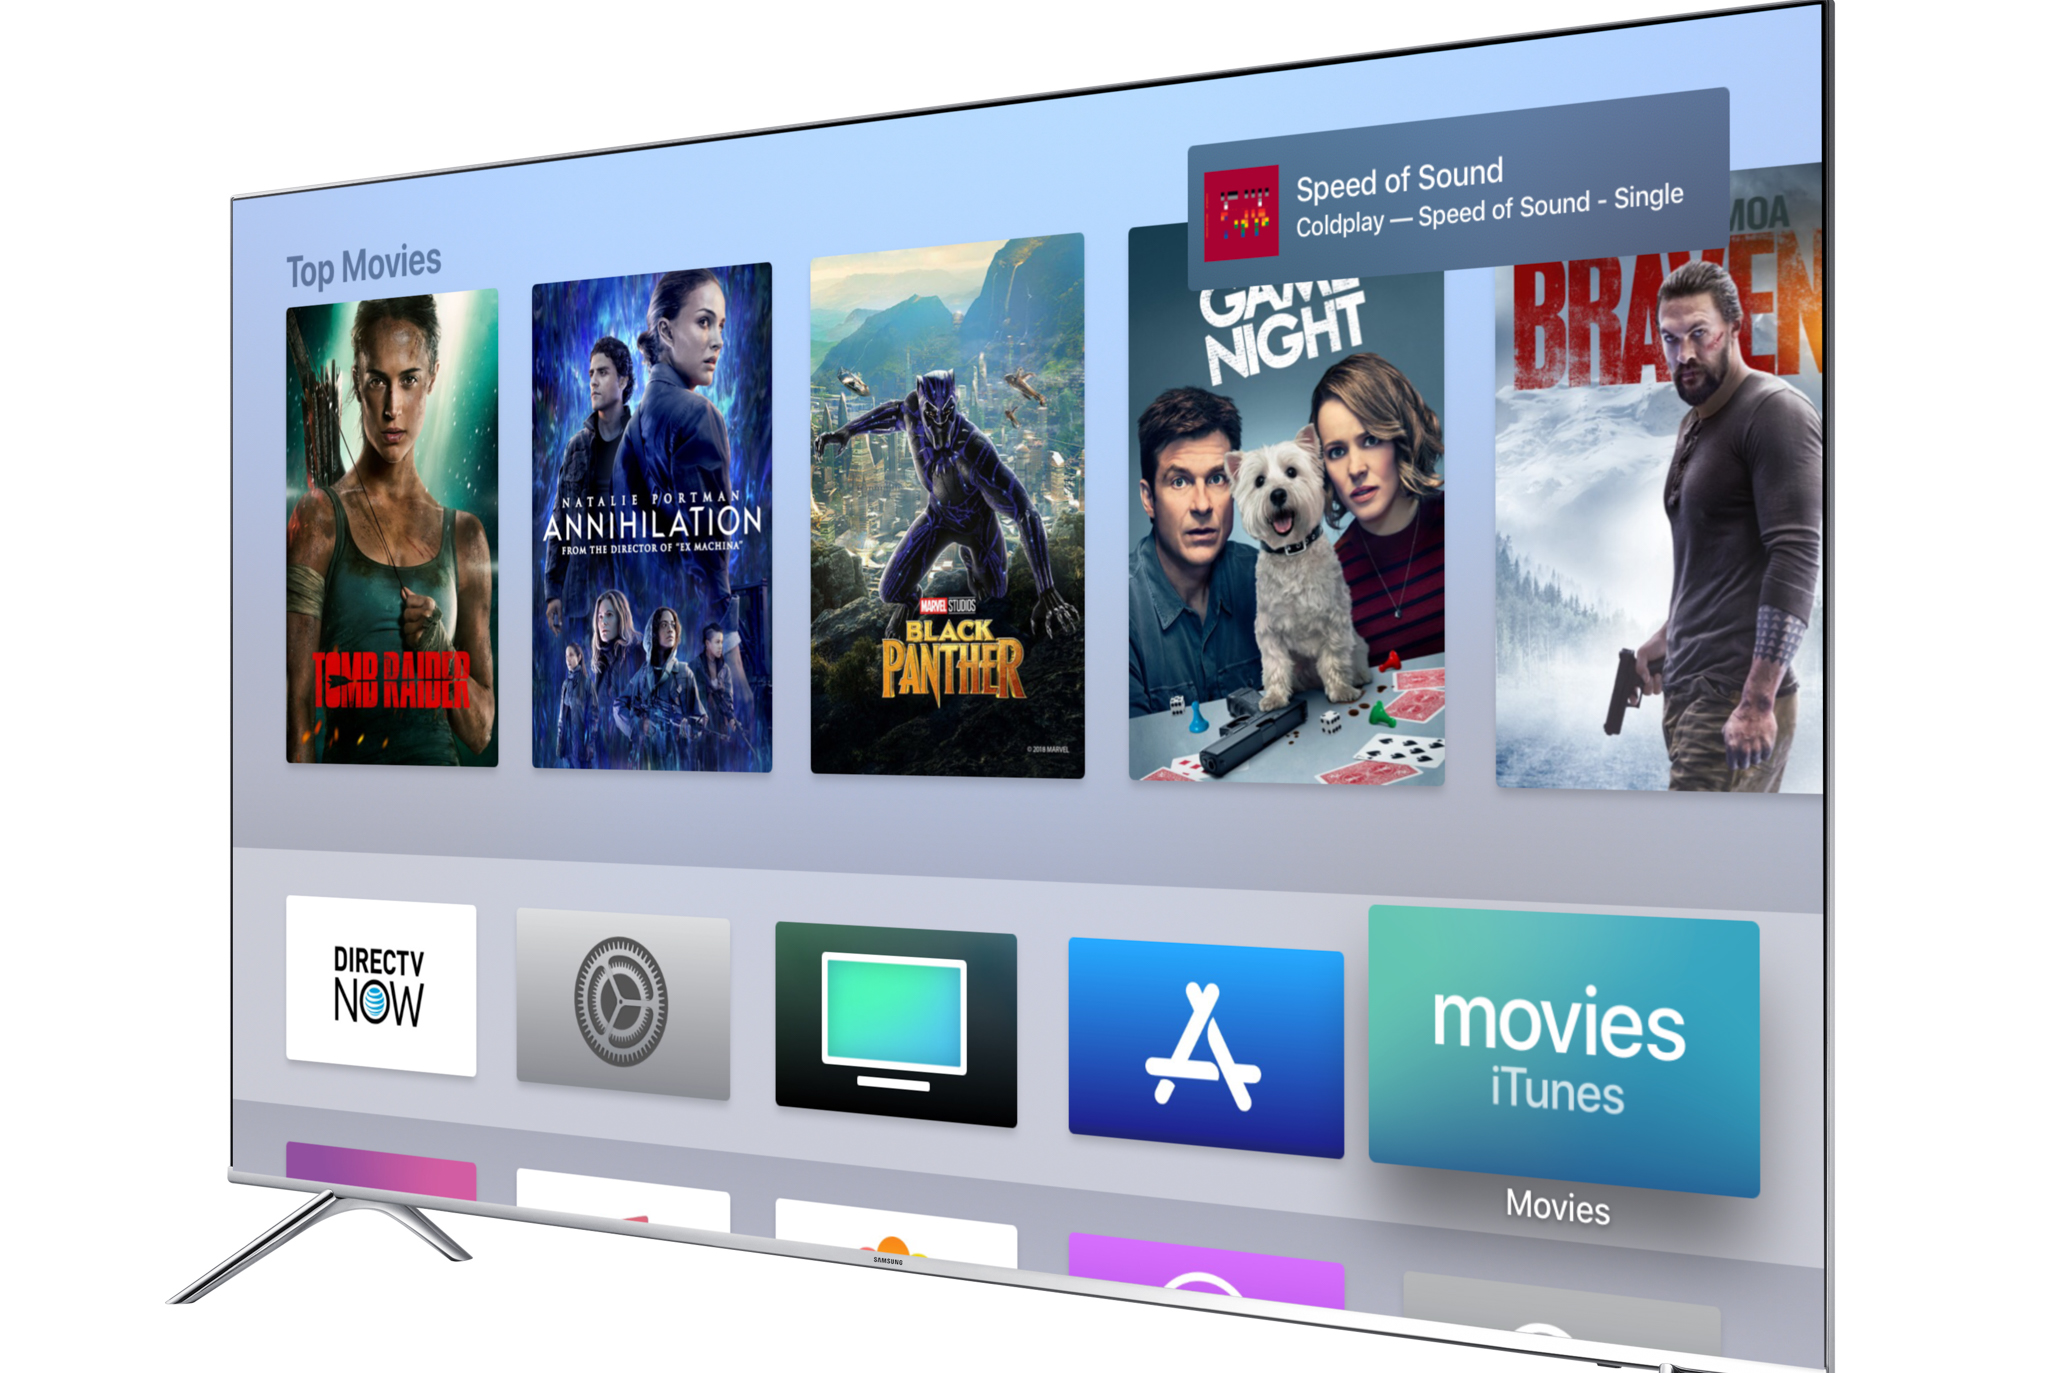 When an Apple TV is selected as an Airplay 2 speaker source, a pop-up appears on top of whatever content is currently displayed on the attached TV display. Image: Digitized House Media.